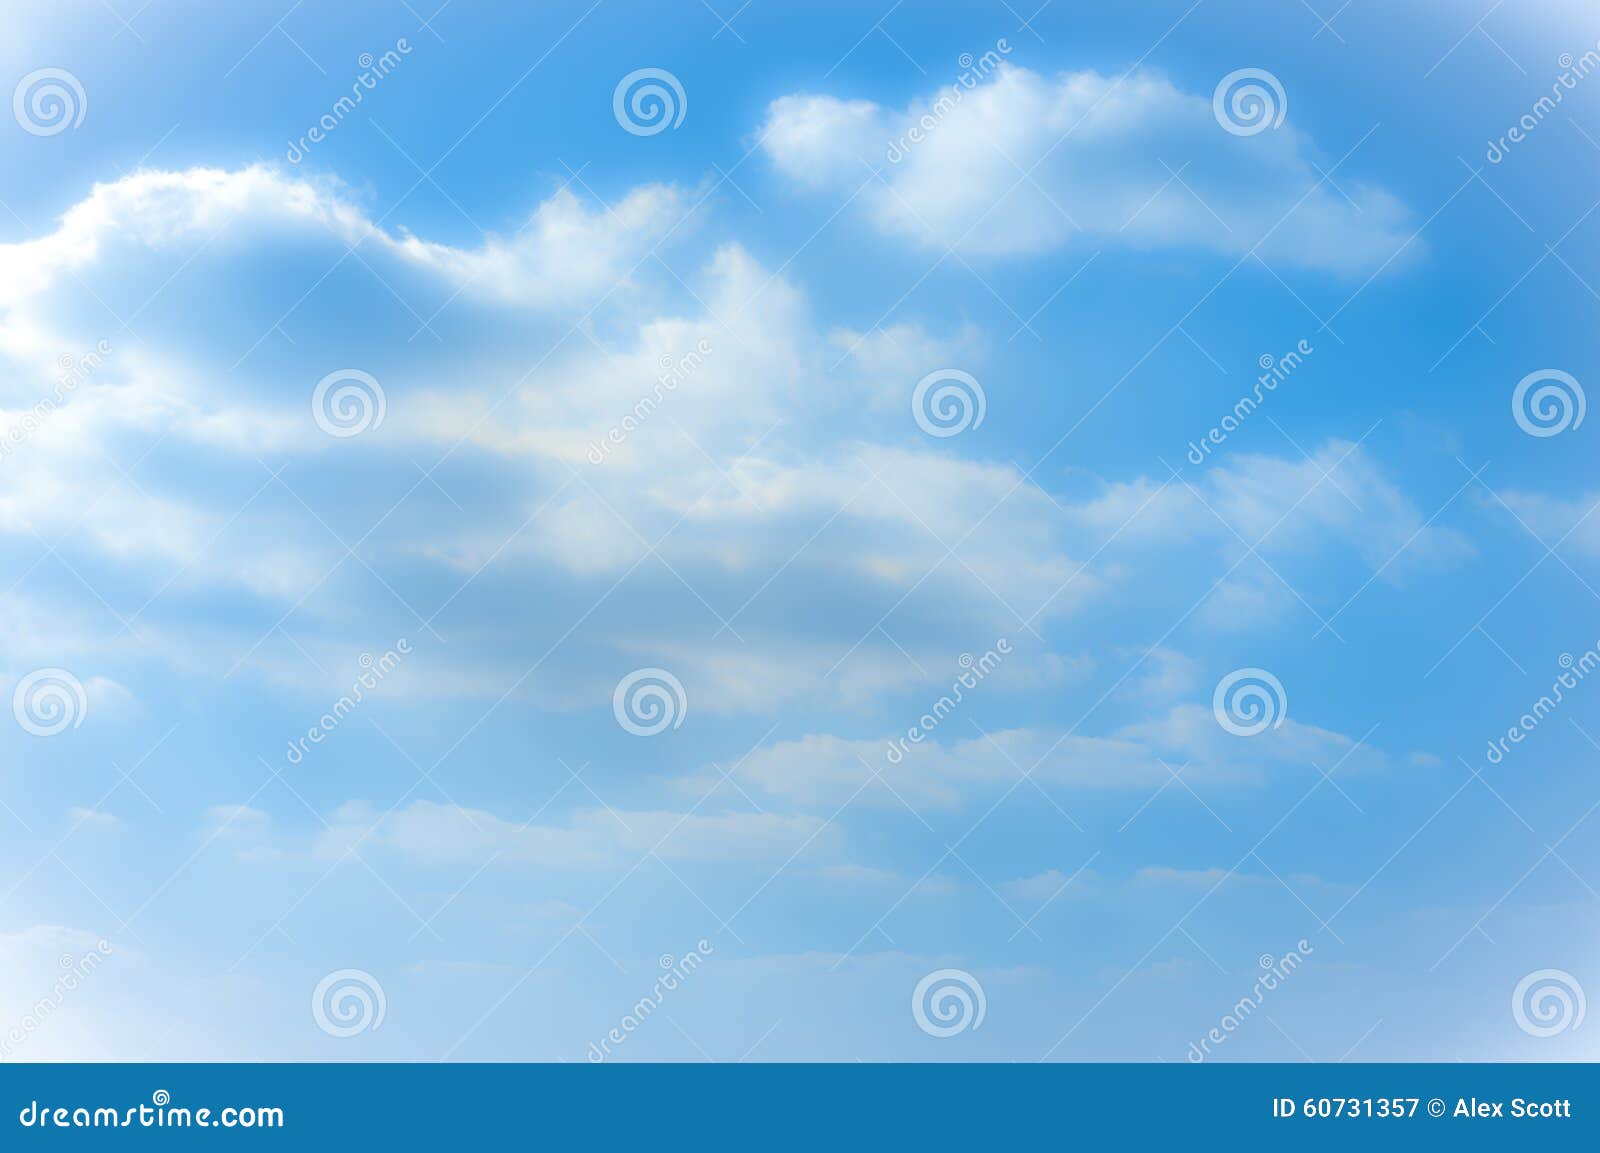 Blue sky and clouds stock image. Image of relaxation - 60731357